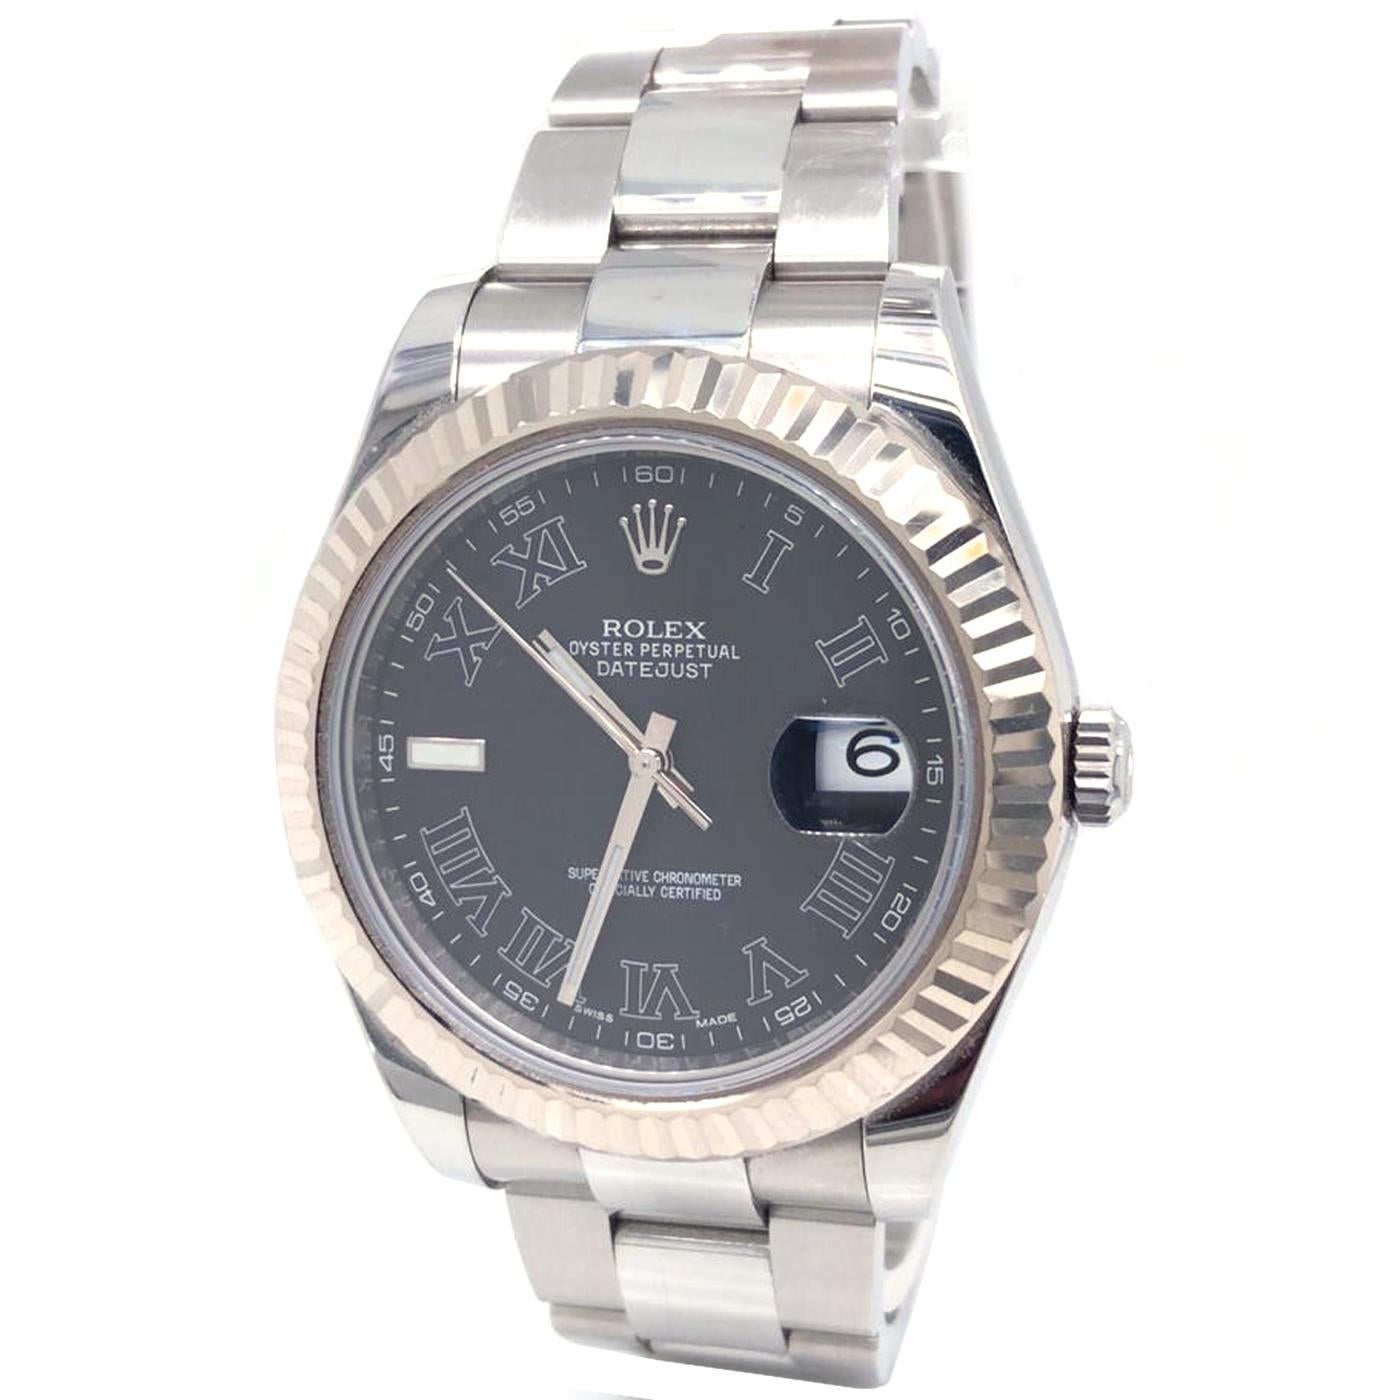 Rolex Datejust II in stainless steel Ref# 116334 the Year 2015. On the original stainless steel Oyster bracelet with a stainless steel deployment clasp. Fluted 18k white gold bezel with a sapphire crystal. Rehaut engraved with the serial number. The